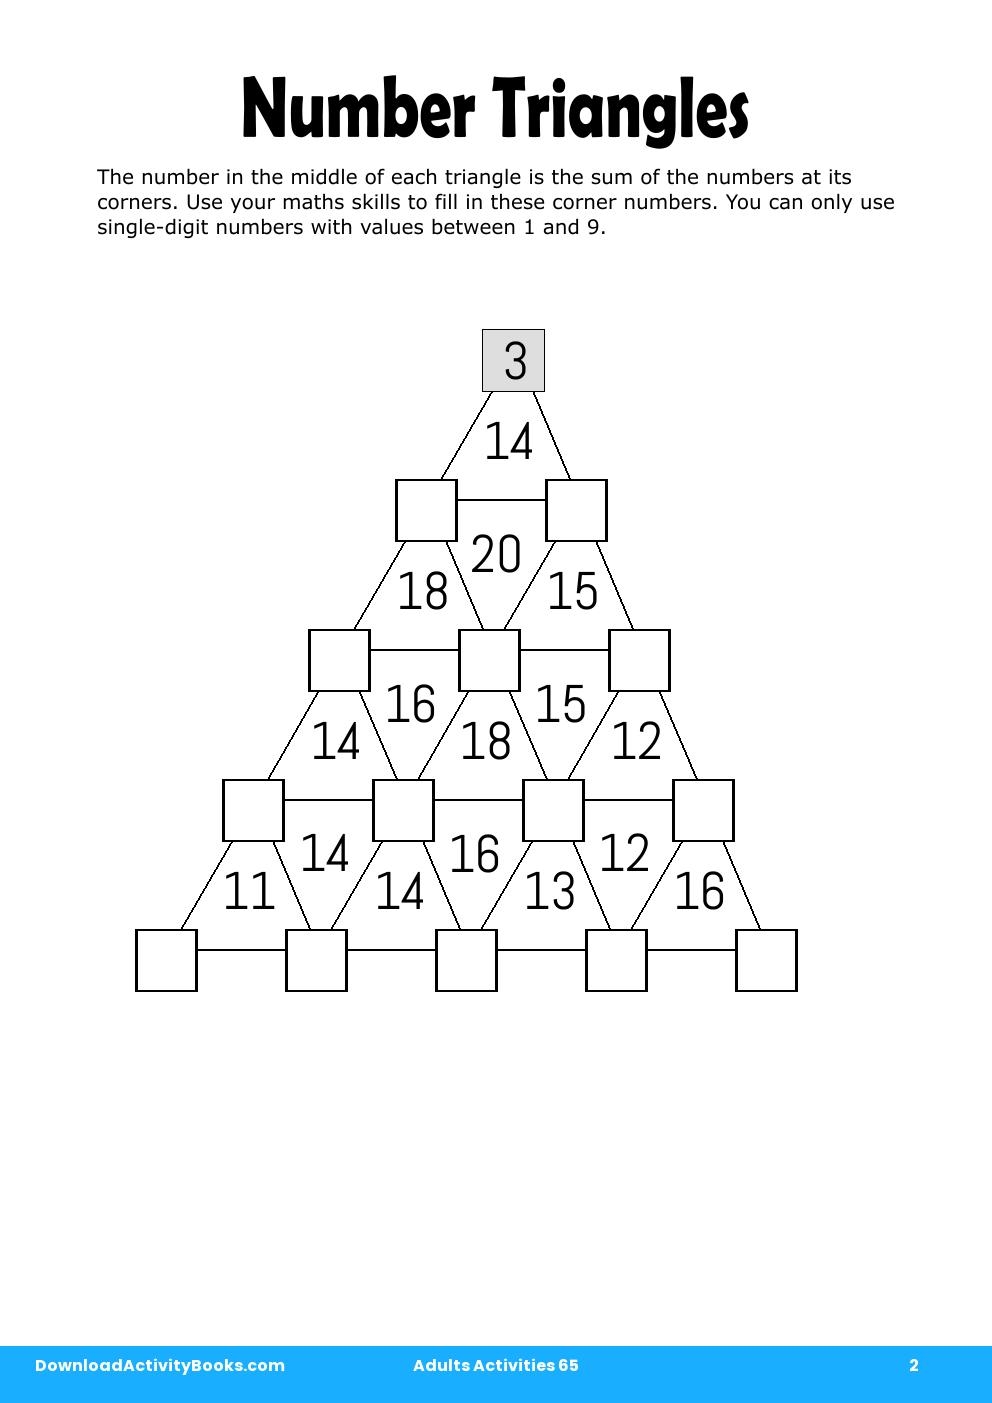 Number Triangles in Adults Activities 65